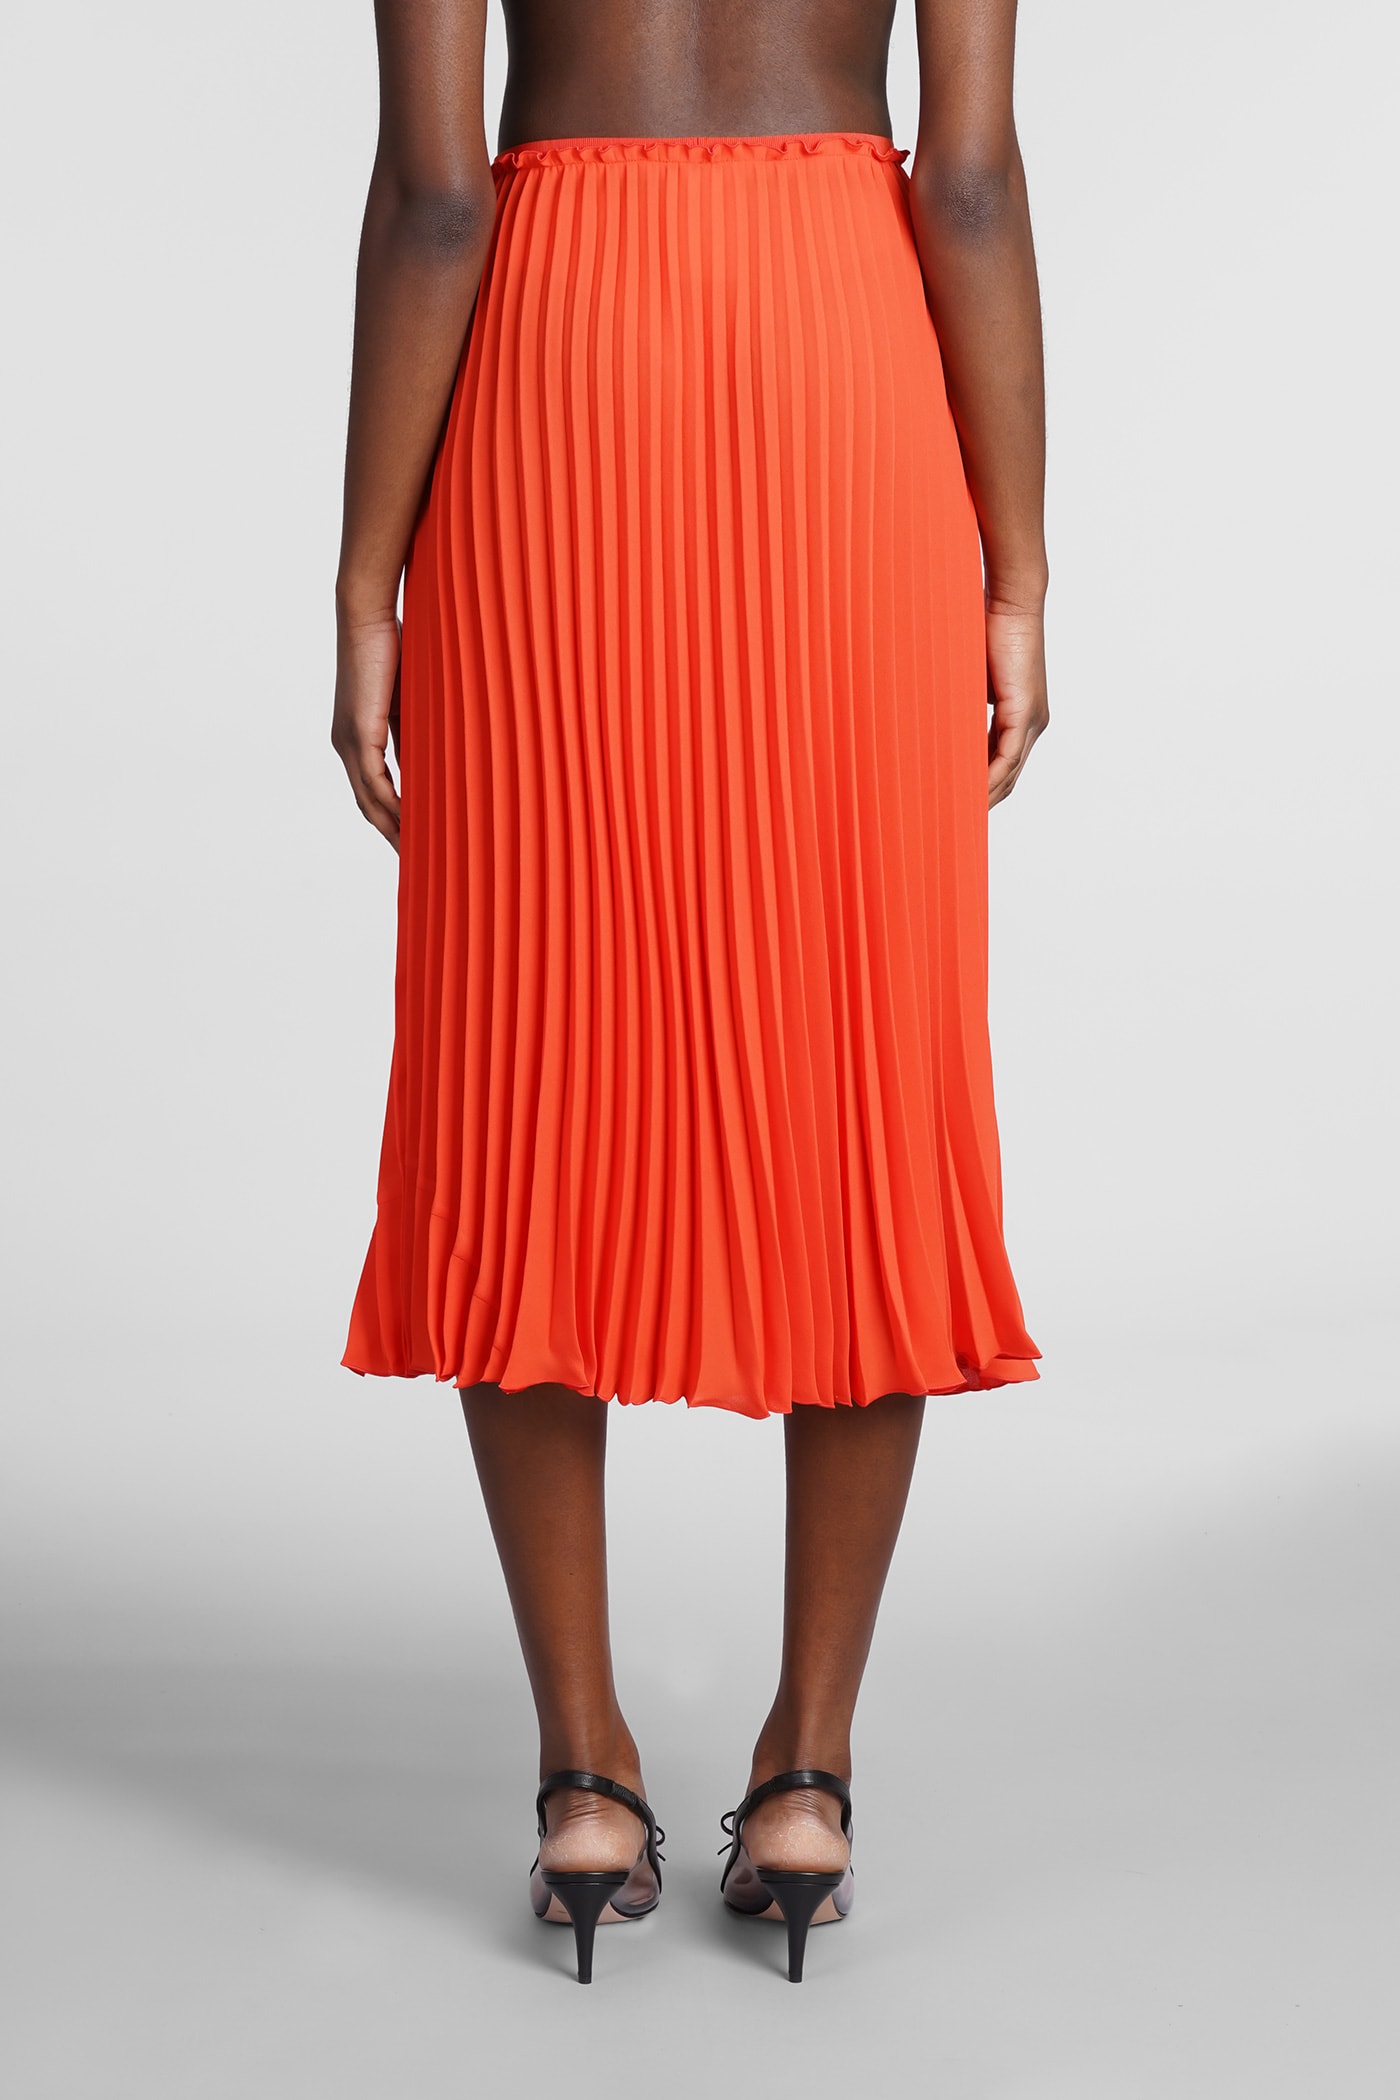 Shop Red Valentino Skirt In Orange Synthetic Fibers